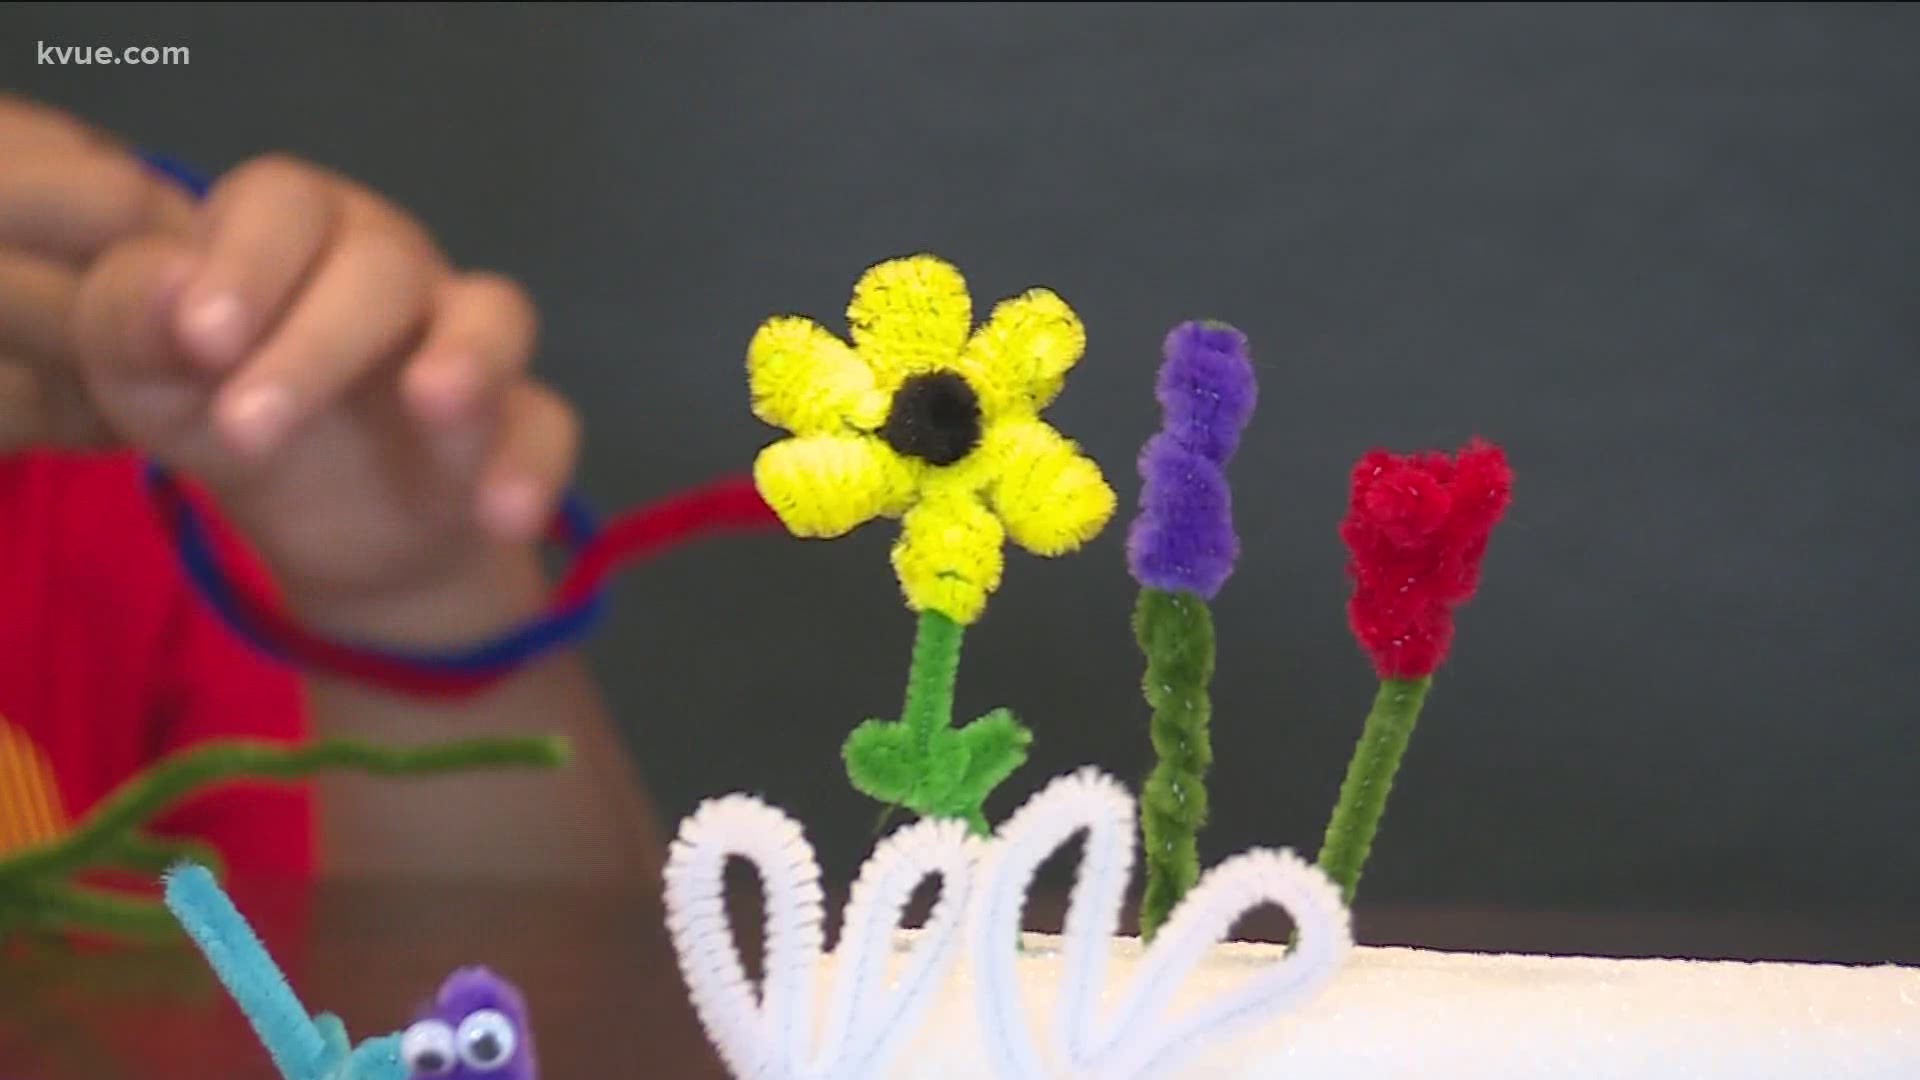 This week we make animals, jewelry and flowers out of pipe cleaners. It's simple and not messy!